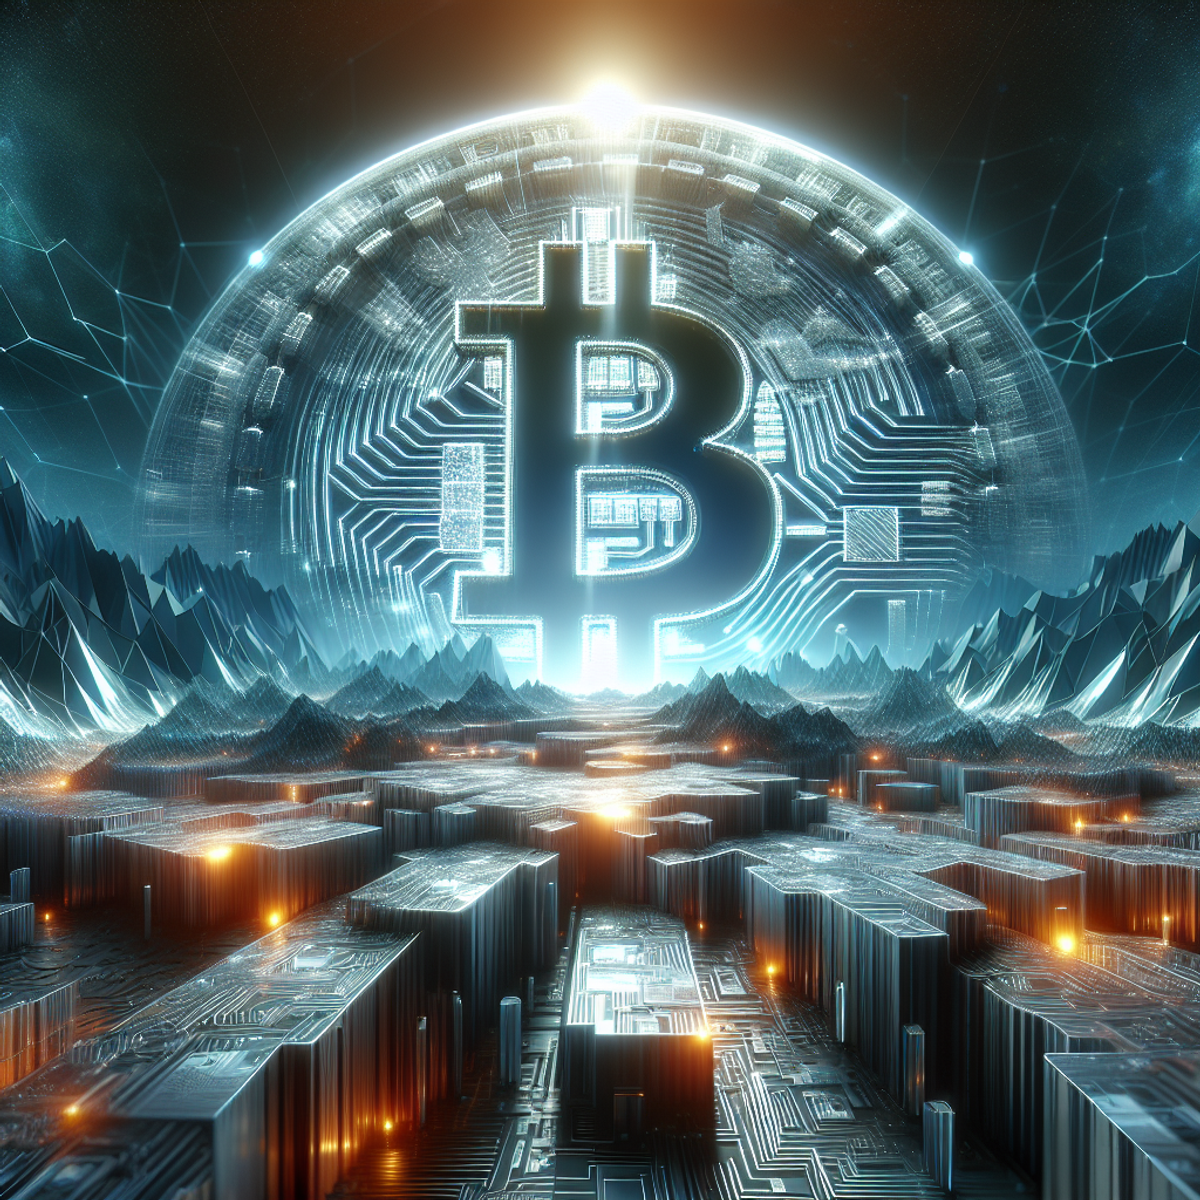 A digital landscape with a shimmering Bitcoin symbol rising from a complex, cybernetic terrain of geometric shapes and lines.